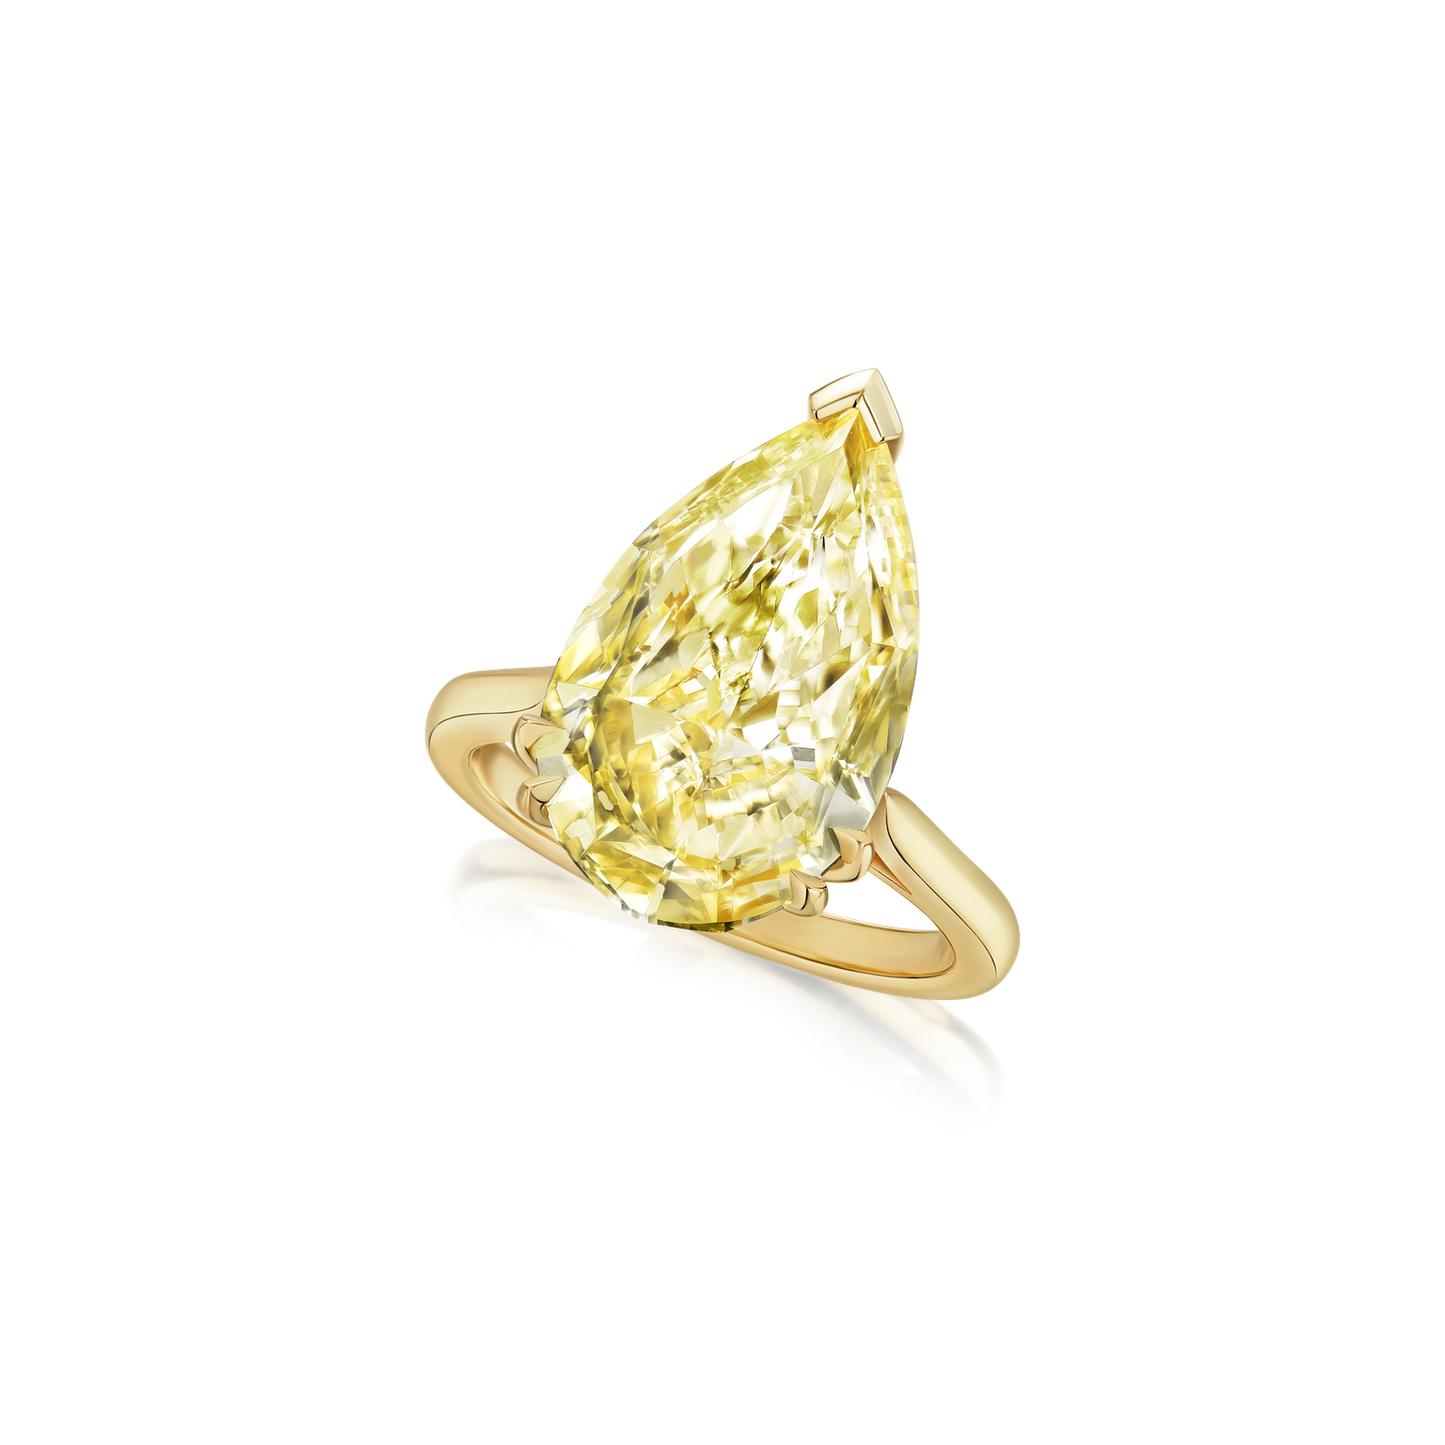 8.78cts Yellow Pear-Cut Diamond Engagement Ring